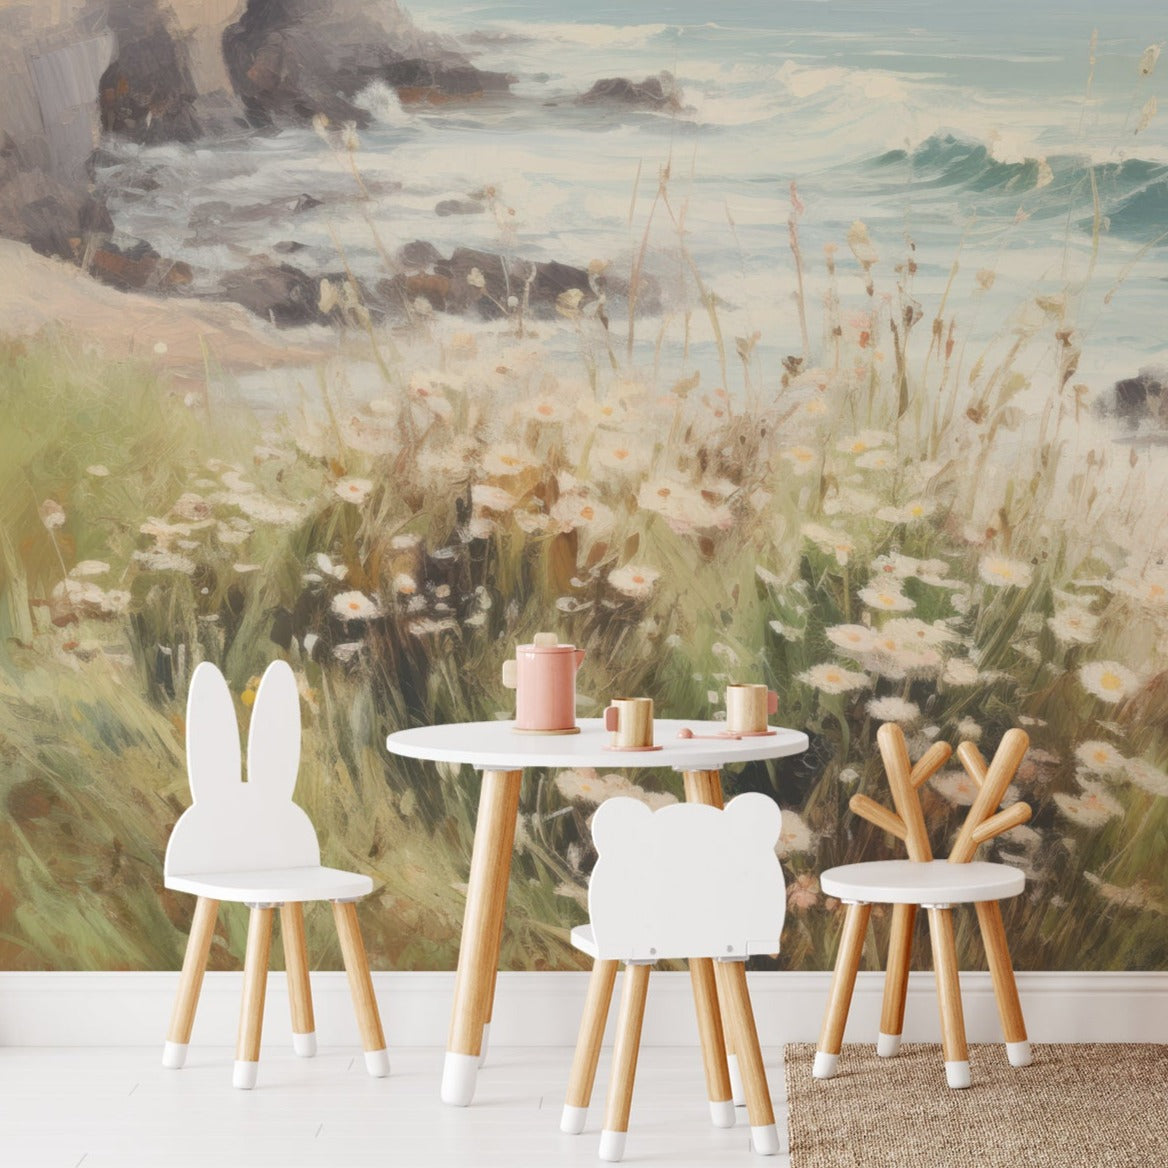 Royal National Park Mural in a kid's room with coastal scenery and wildflowers, adding a natural touch to the decor.